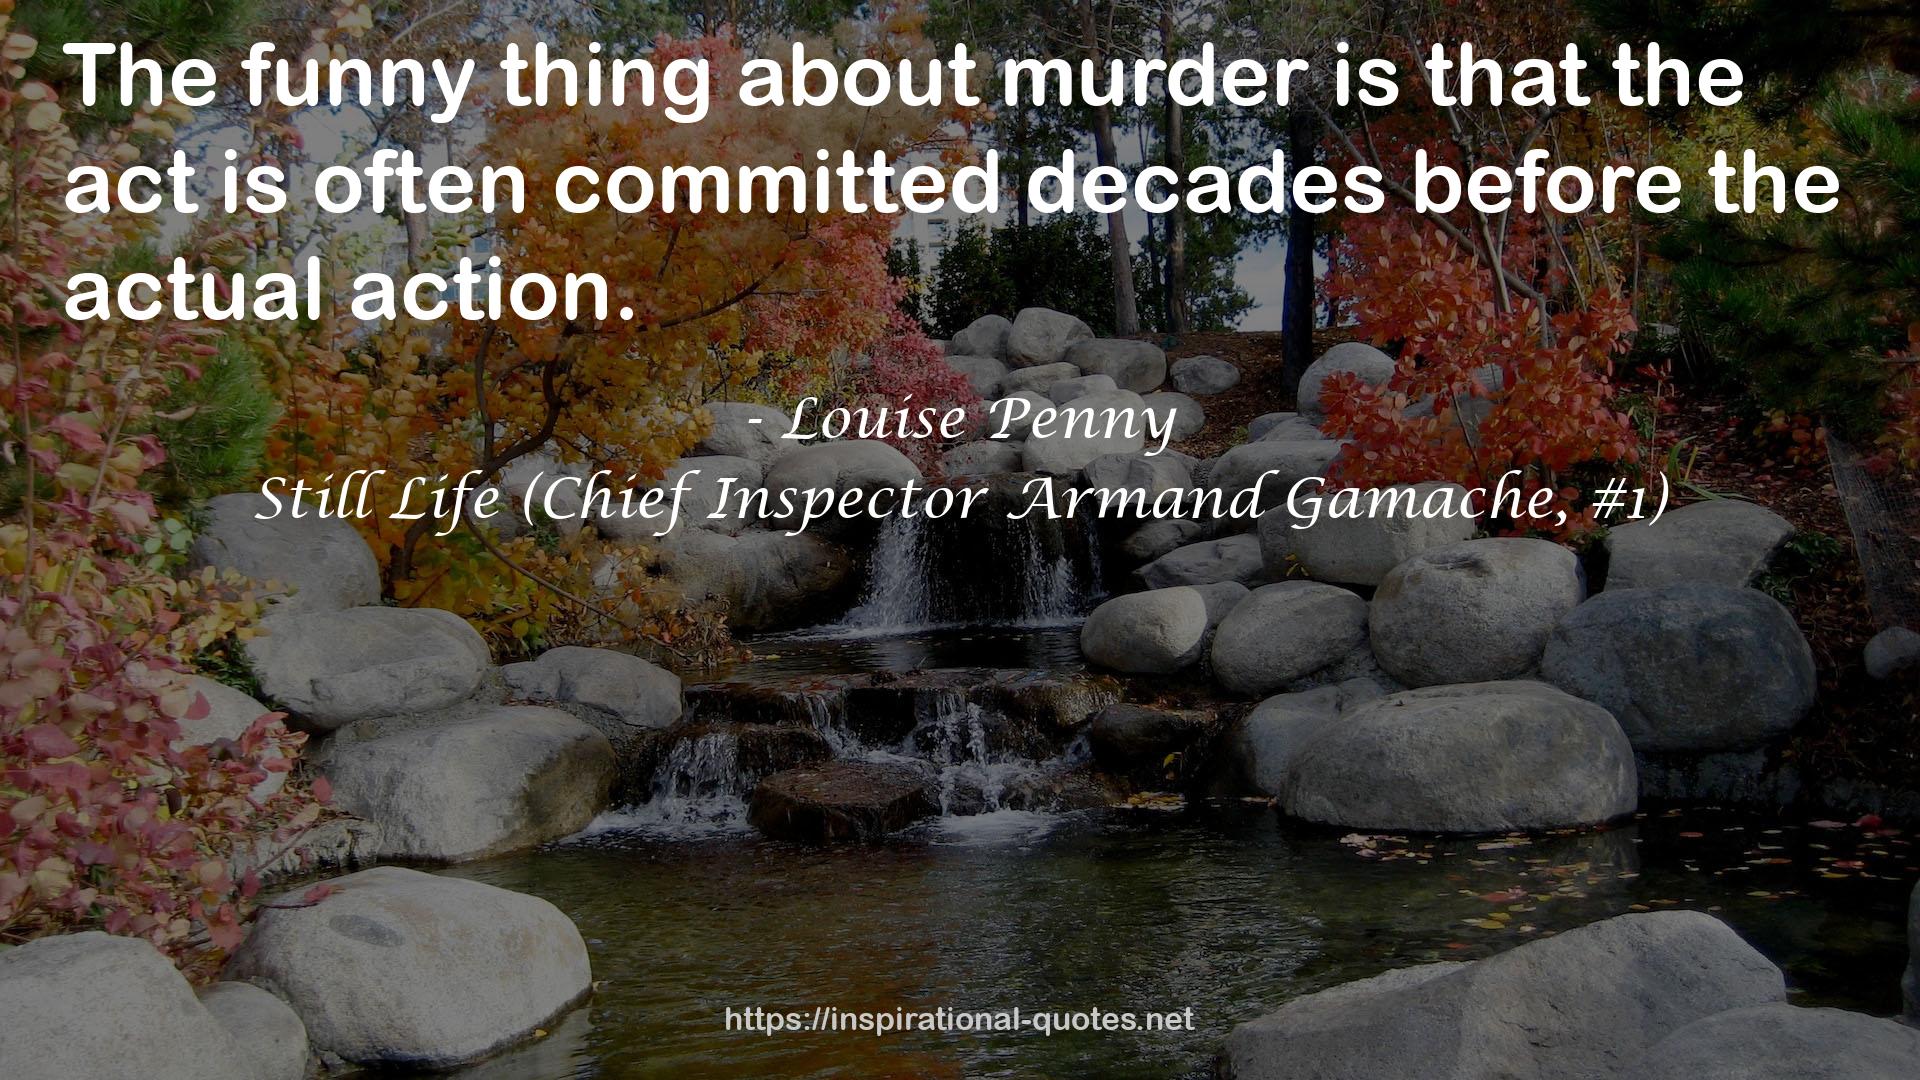 Still Life (Chief Inspector Armand Gamache, #1) QUOTES